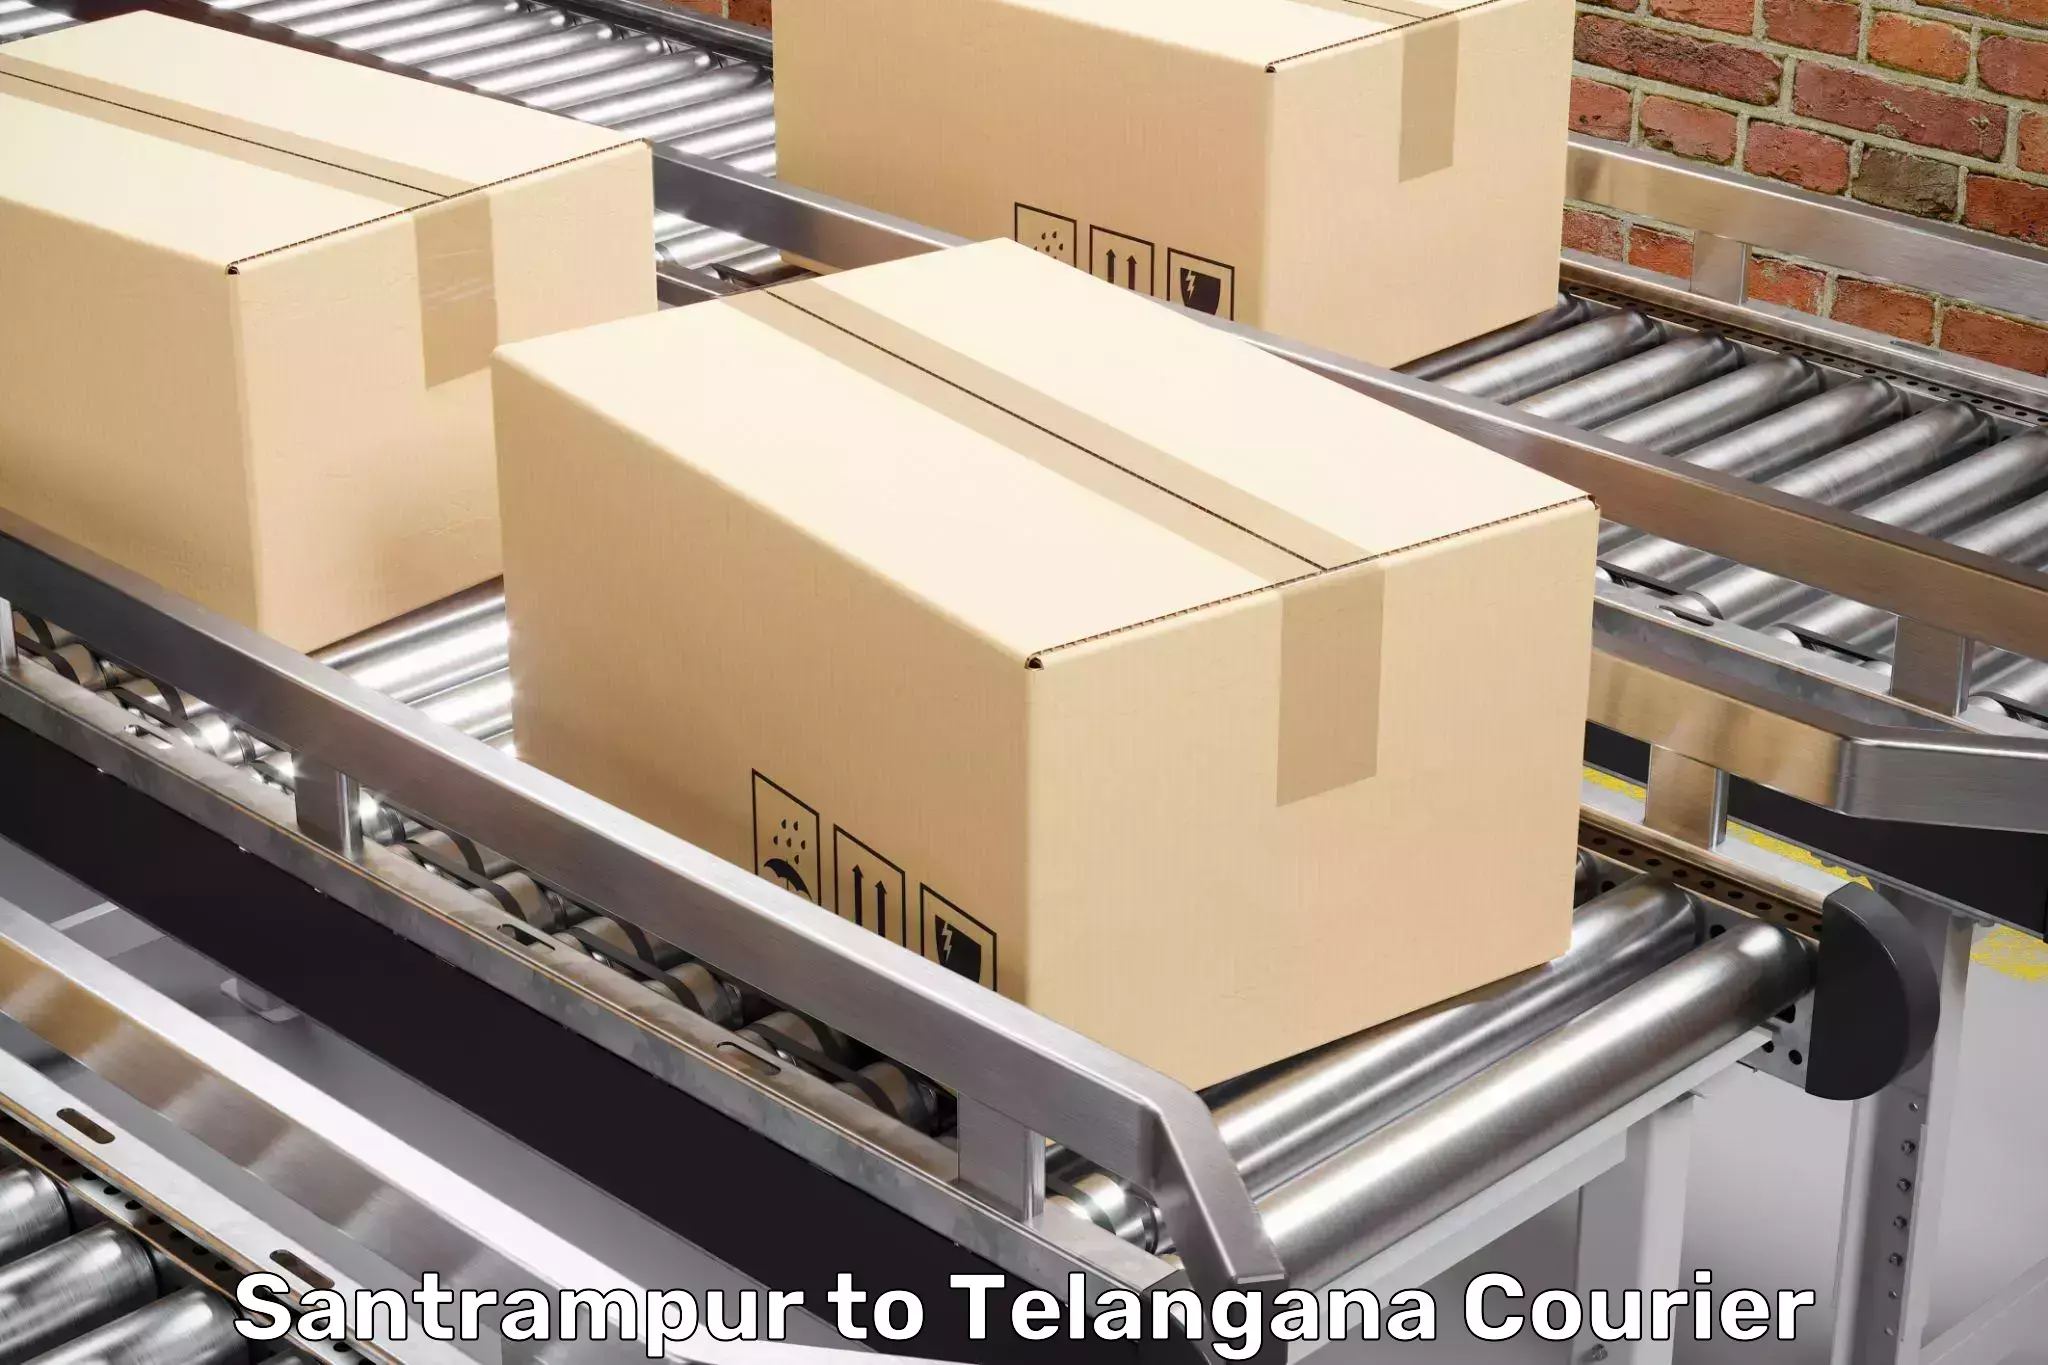 Quality relocation assistance Santrampur to Bellampalli